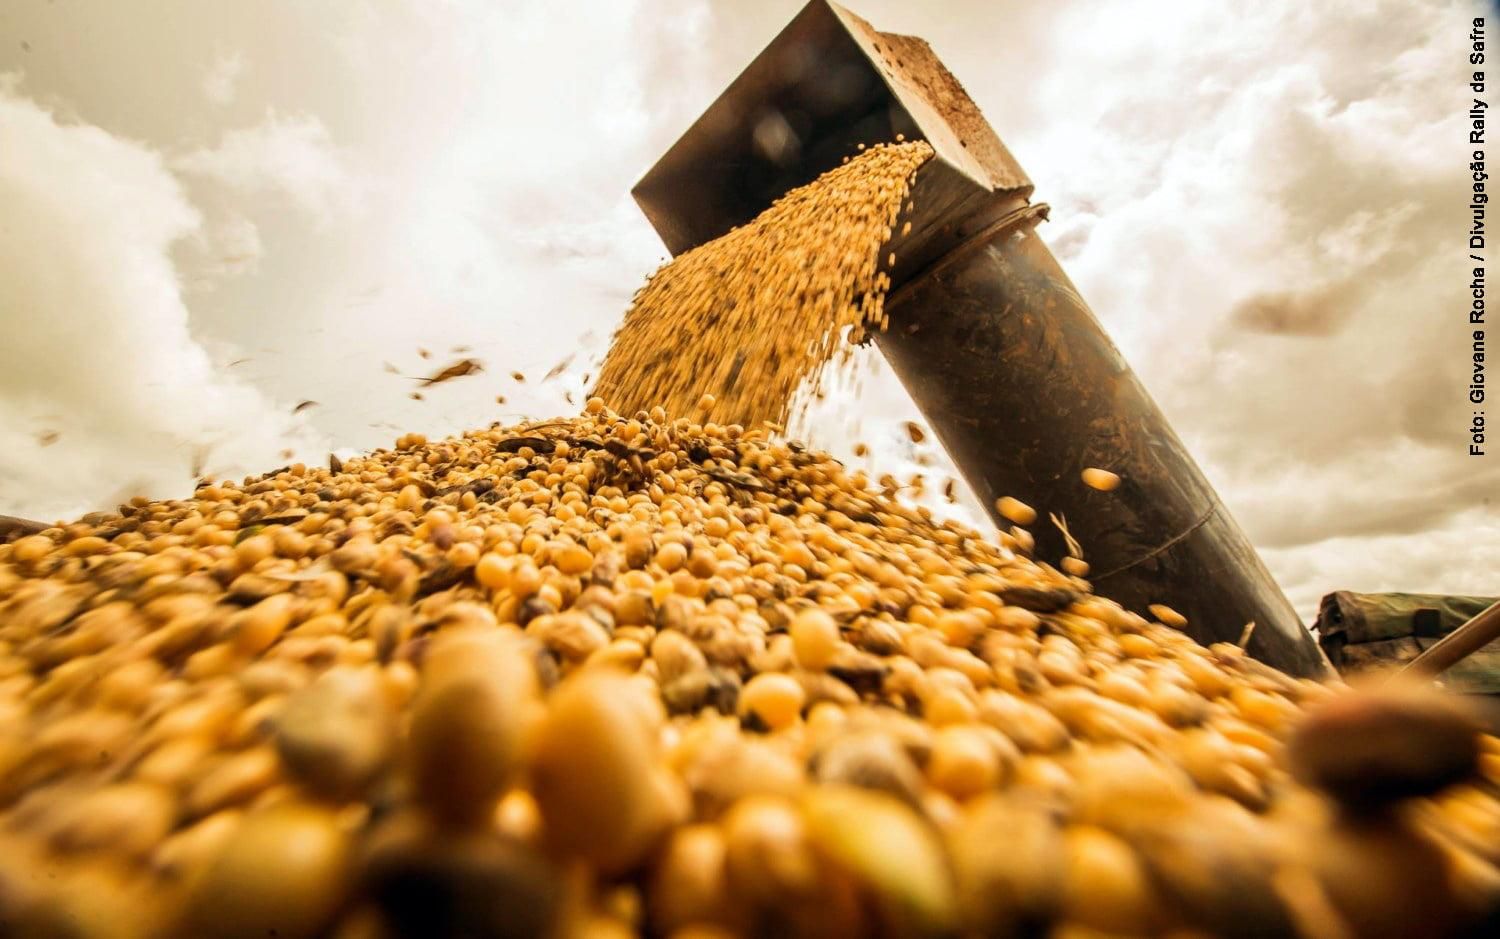 Excess rainfall in Brazil lowers quality of soybeans and generates crop losses